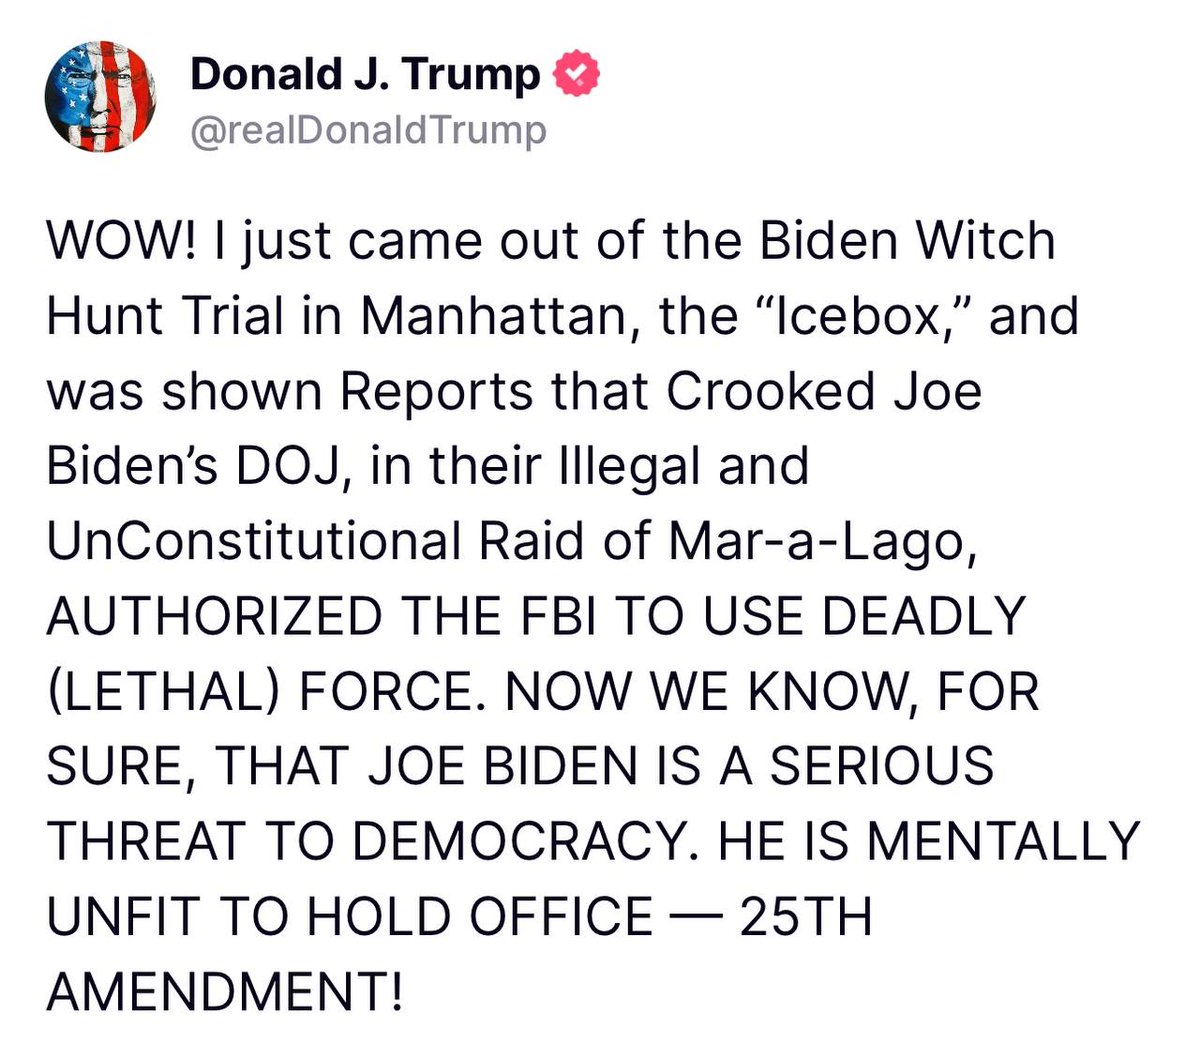 BREAKING: Trump reacts to reports that Joe Biden's DOJ authorized the FBI to use deadly force in the disgraceful MAL raid by calling to remove Joe Biden from office using the 25th Amendment.